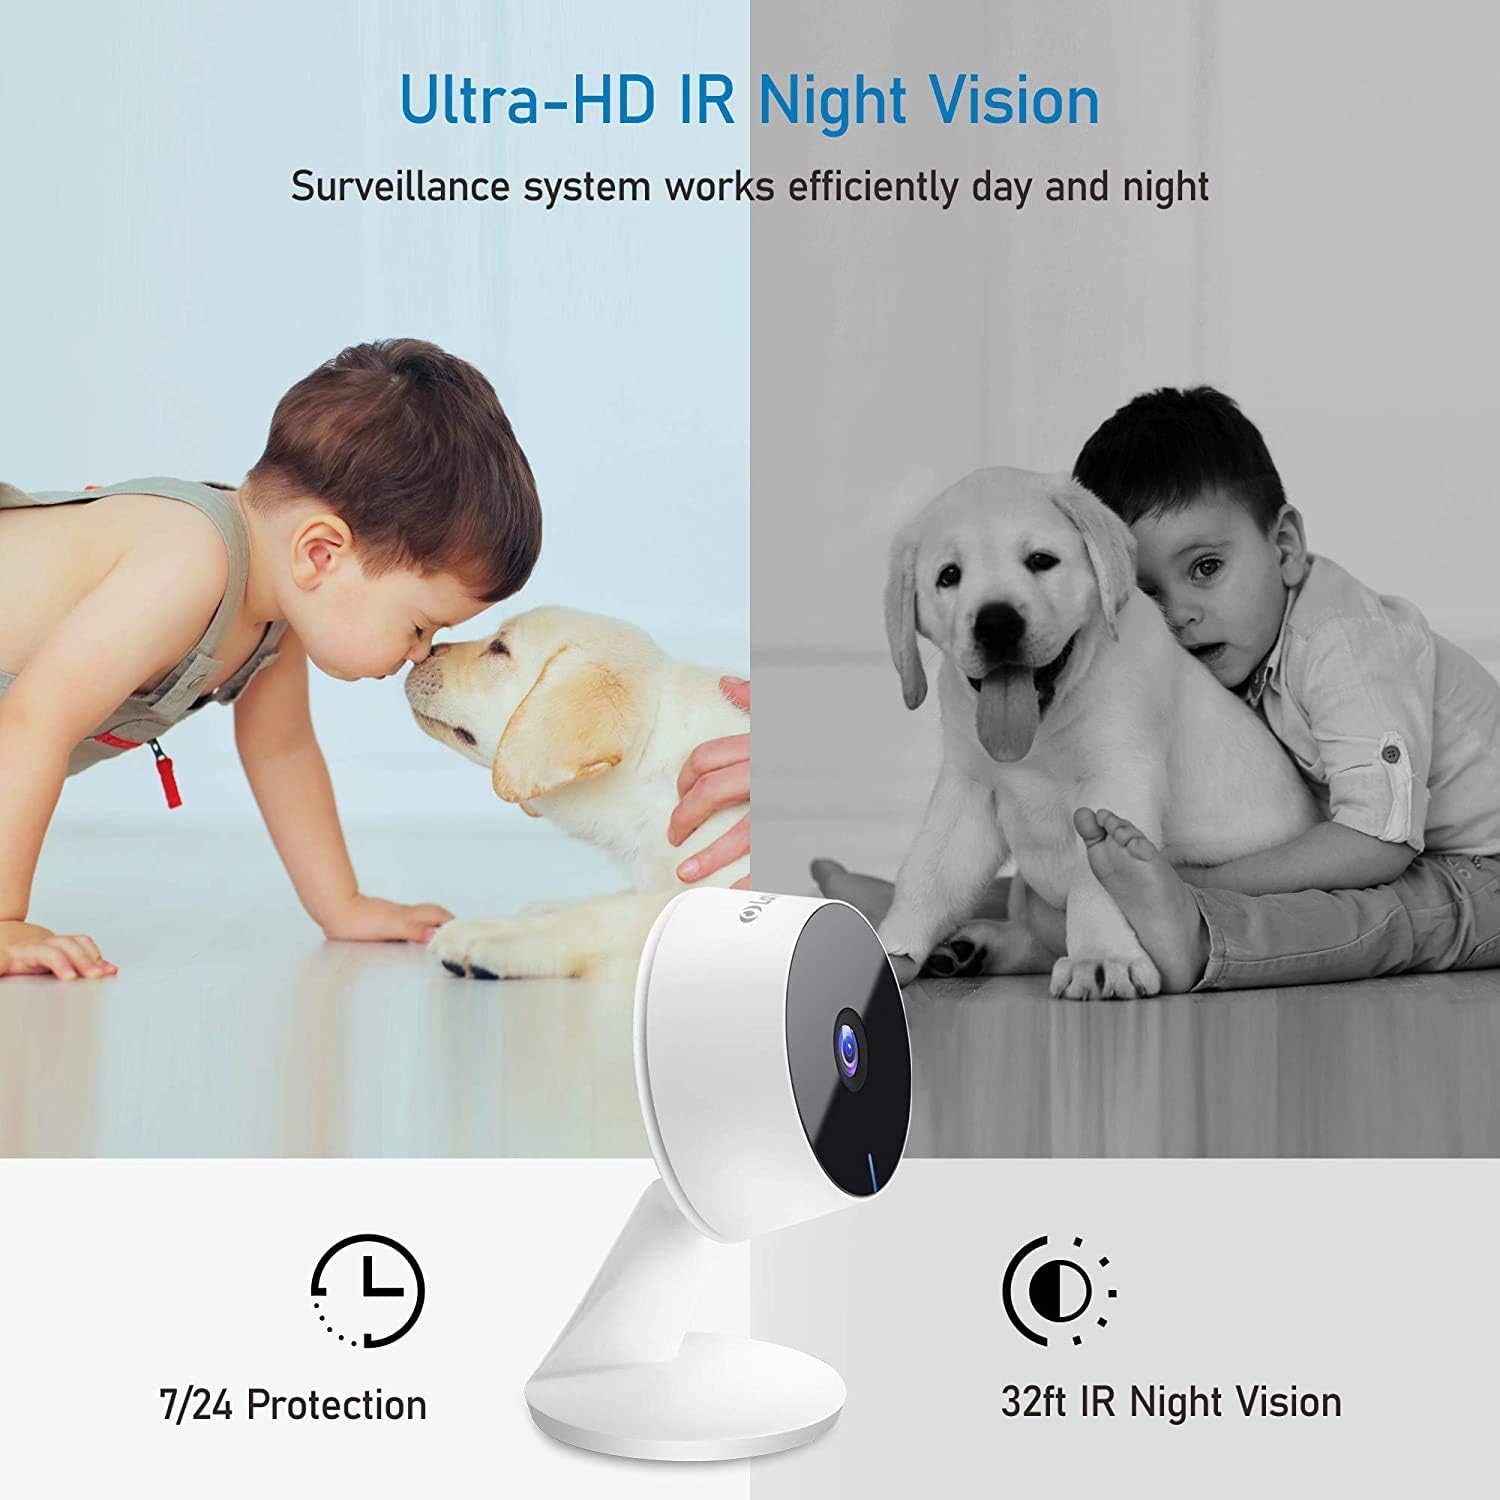 LaView 4MP Cameras for Home Security Indoor,Home Security Cameras for Baby/Elder/Pet/Nanny,Baby Cam Starlight Sensor Color Night Vision,US Cloud Service,Works with Alexa,iOS & Android & Web Access